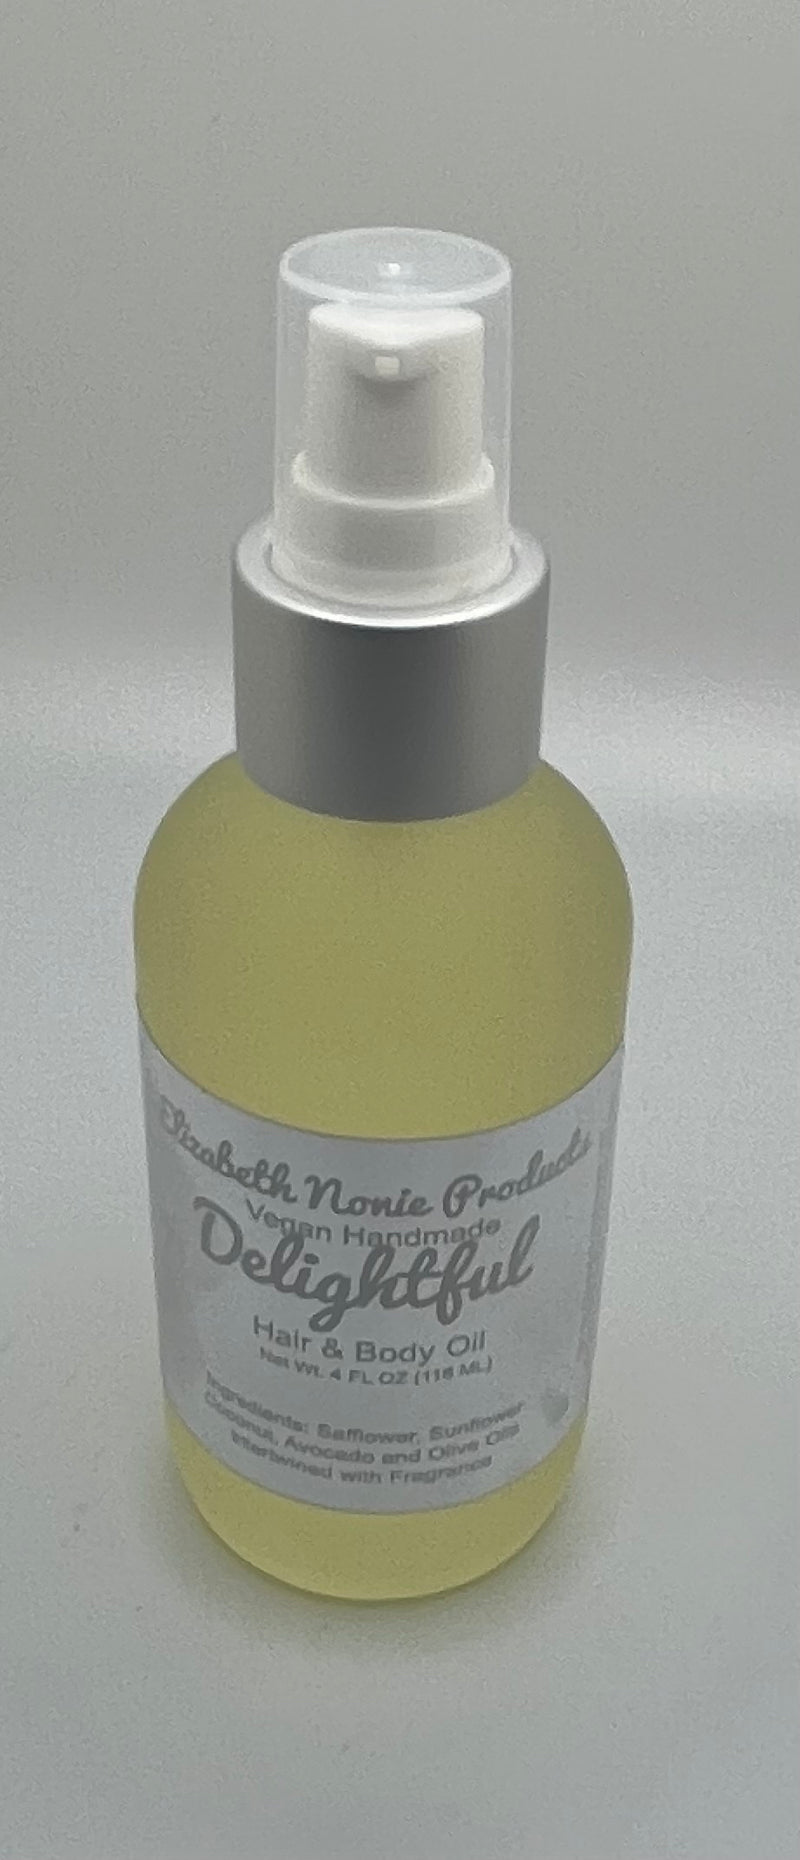 Delightful Hair and Body Oil